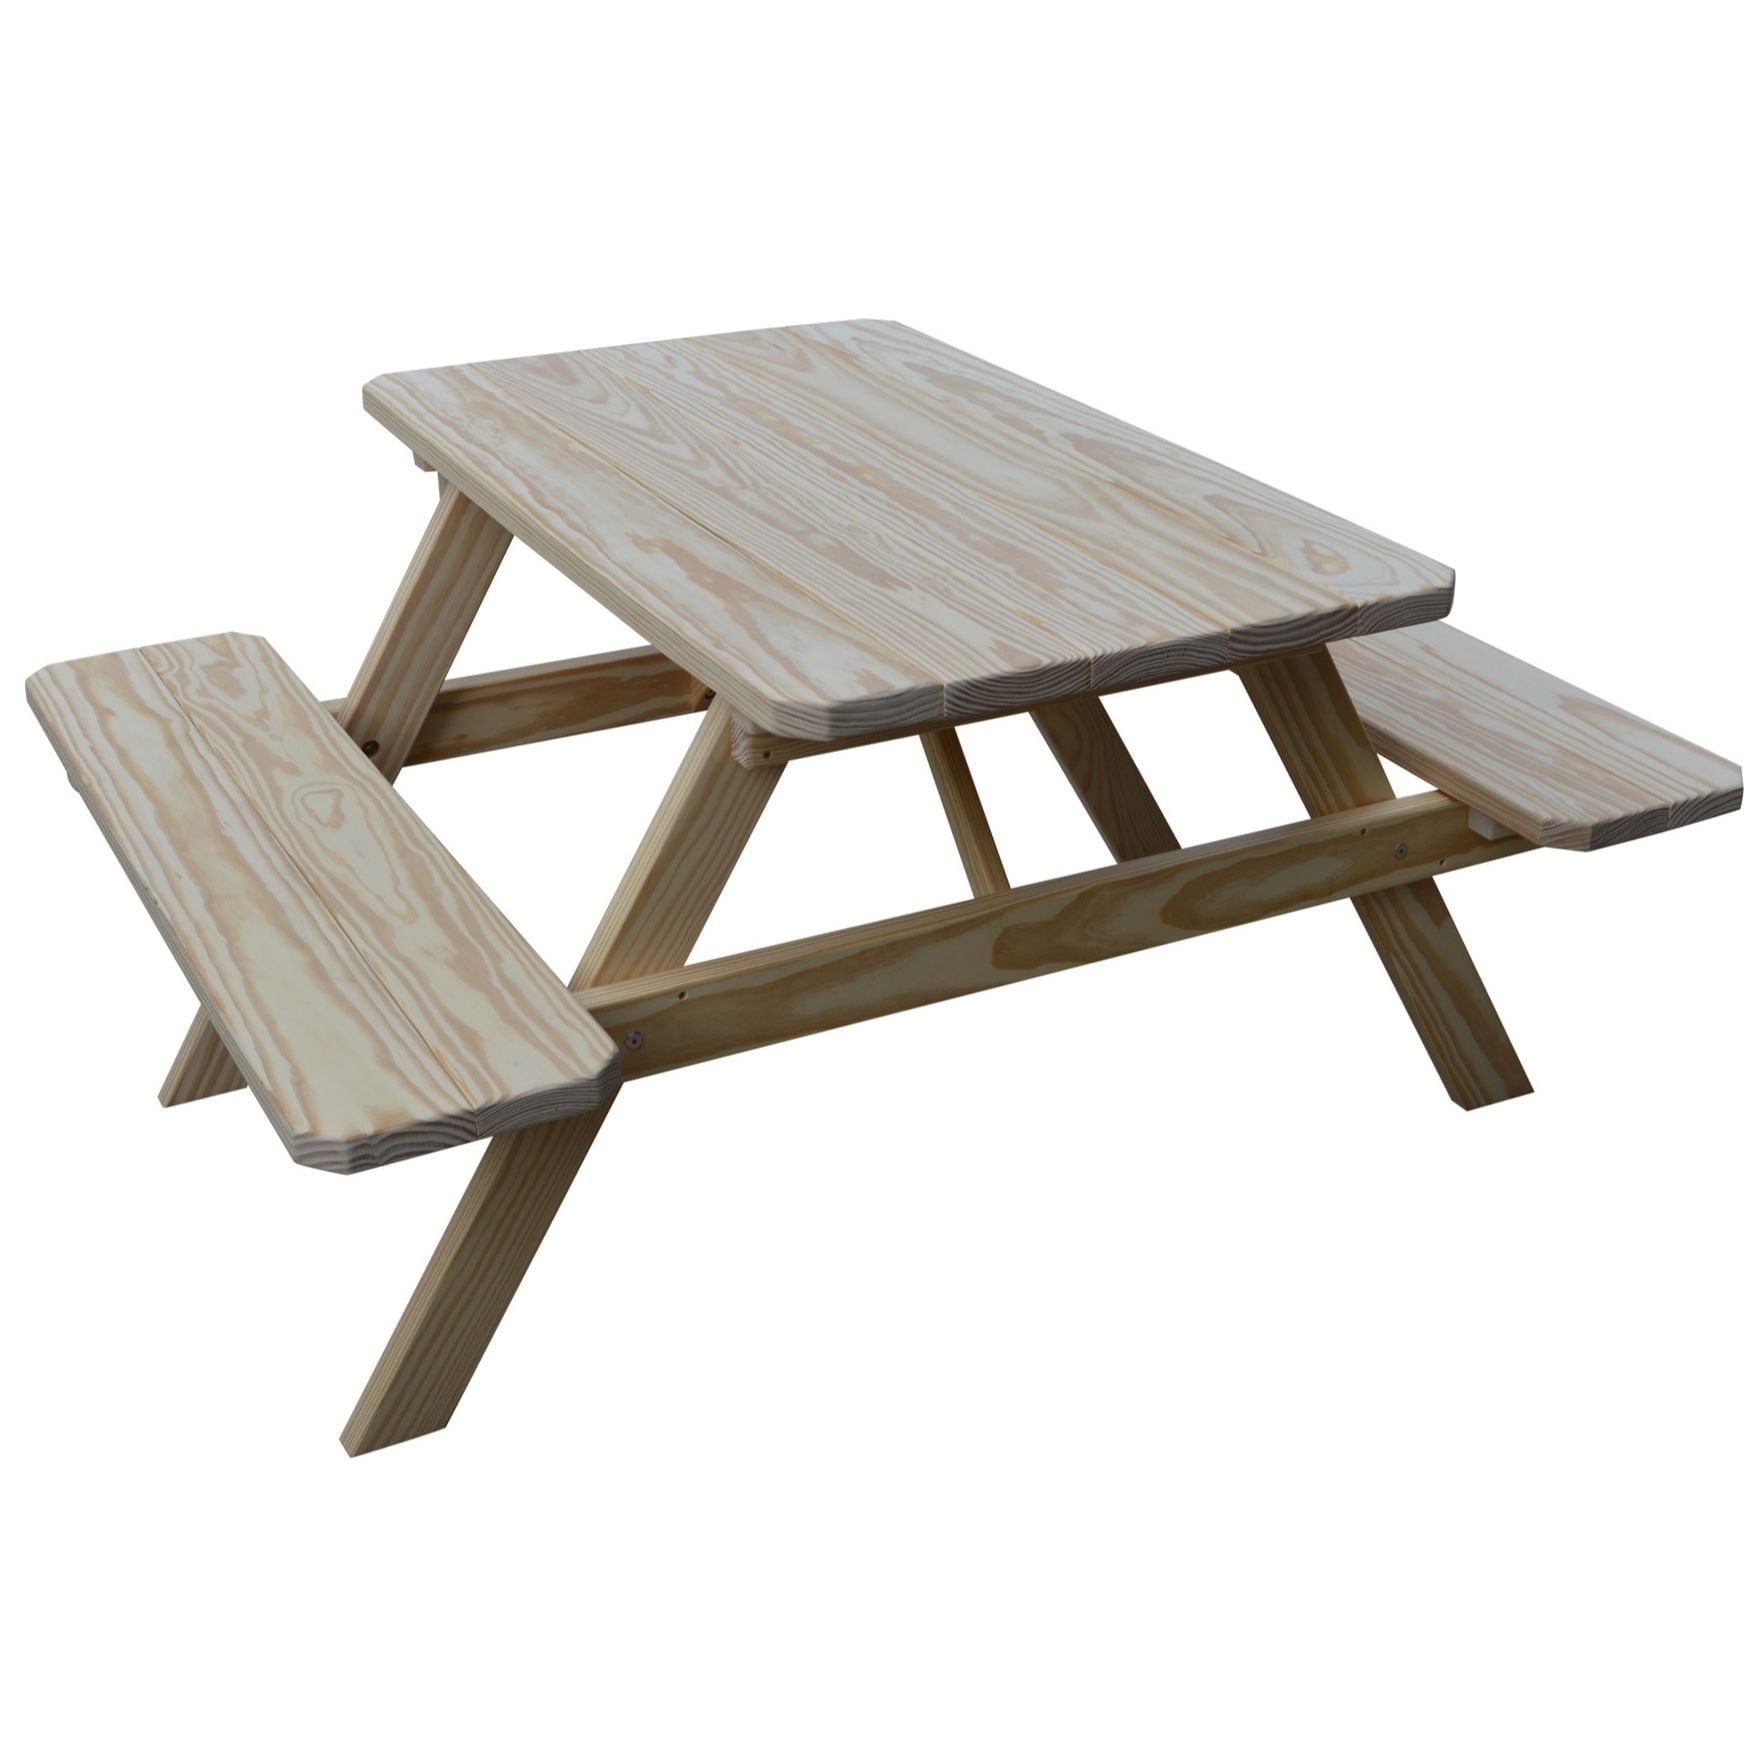 Pine Picnic Table with Attached Benches